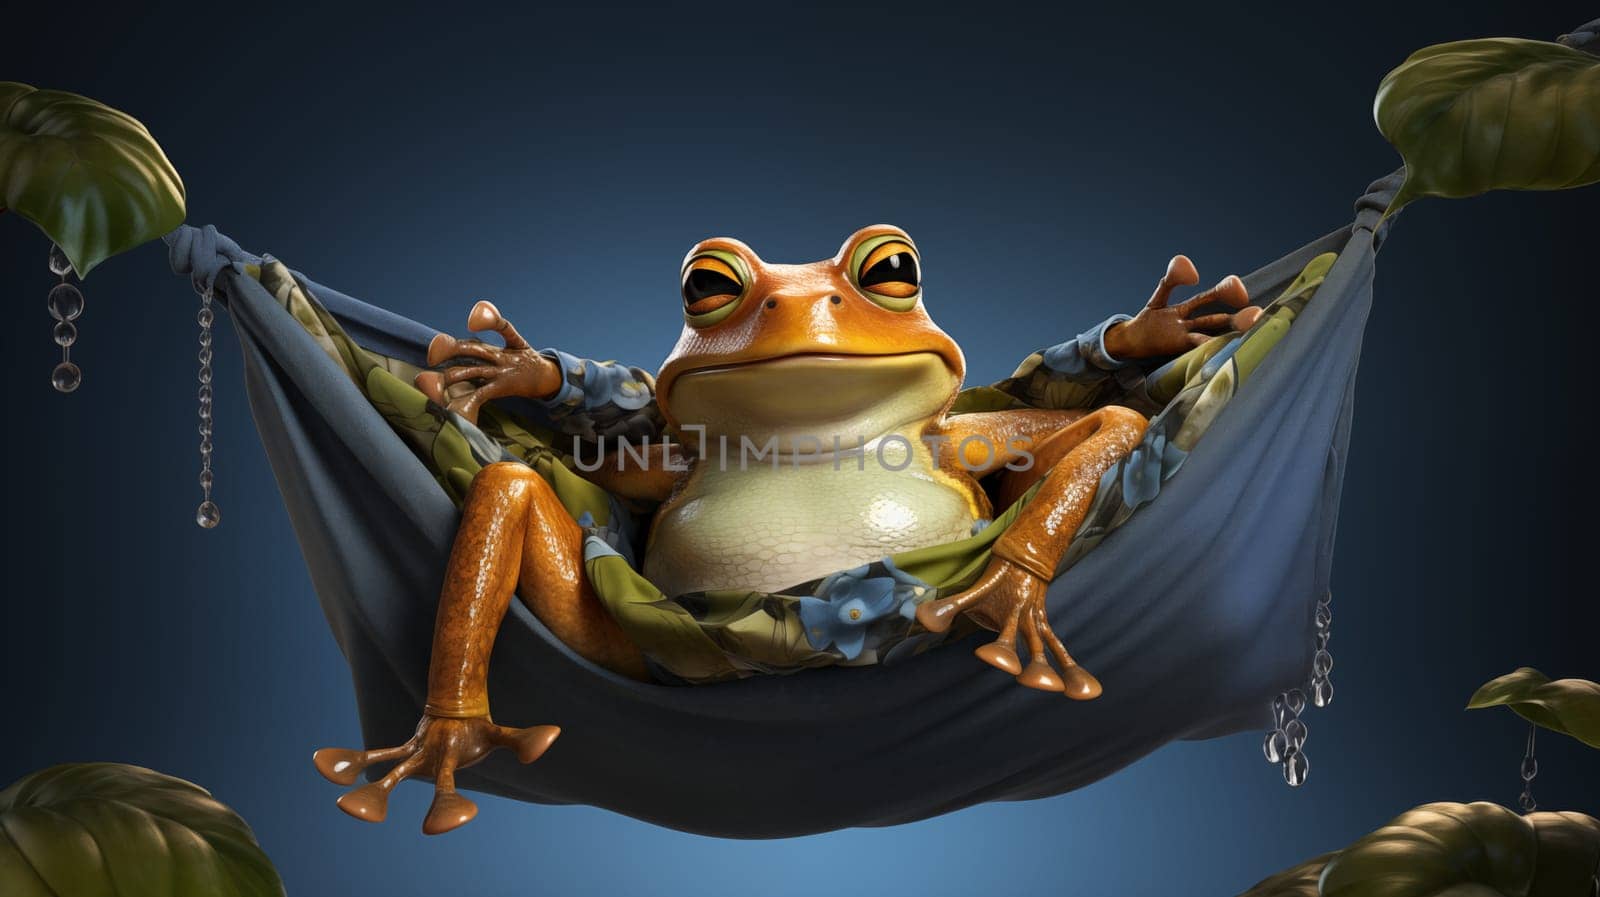 A funny frog is lying comfortably in a hammock on dark blue background with an expression of relaxation and contentment on his face.